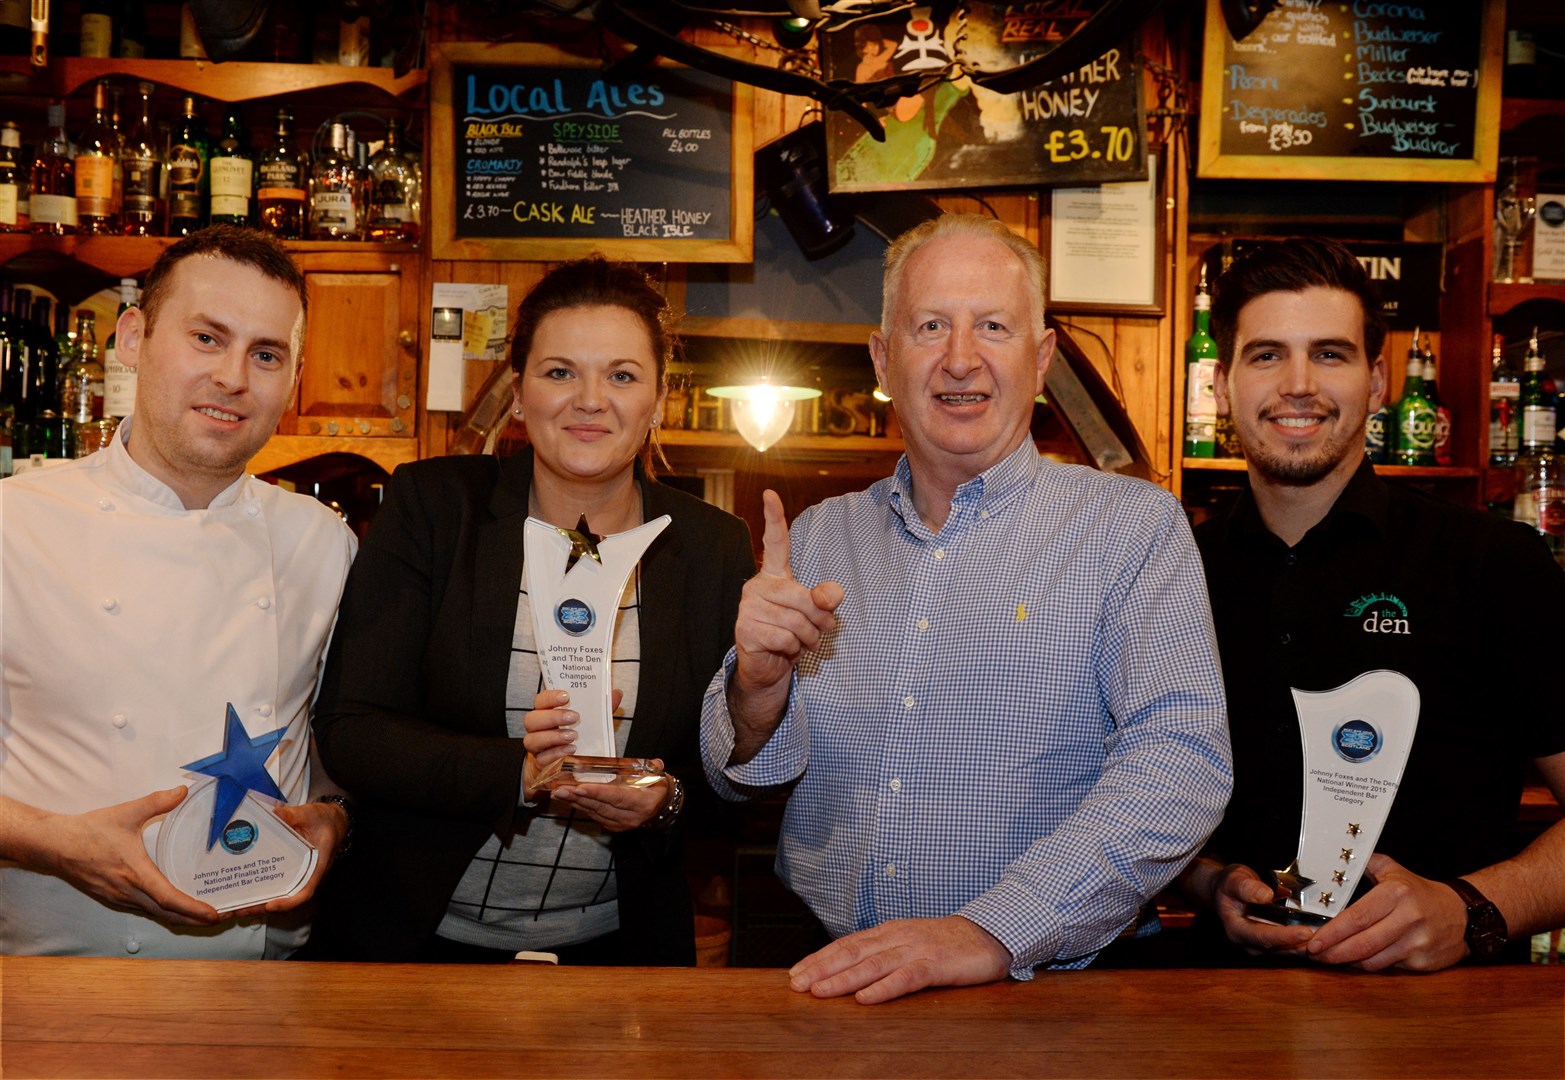 Don Lawson is pictured with some of the team after winning the Best National Bar and Best Independent Bar awards at the Best Bar None National Awards Scotland in Edinburgh back in 2015. Pictured are ( L to R) Head Chef Paul Nisbet, General Manager Tina MacDonald, Don Lawson and Cellar Manager Ruairidh Ross.